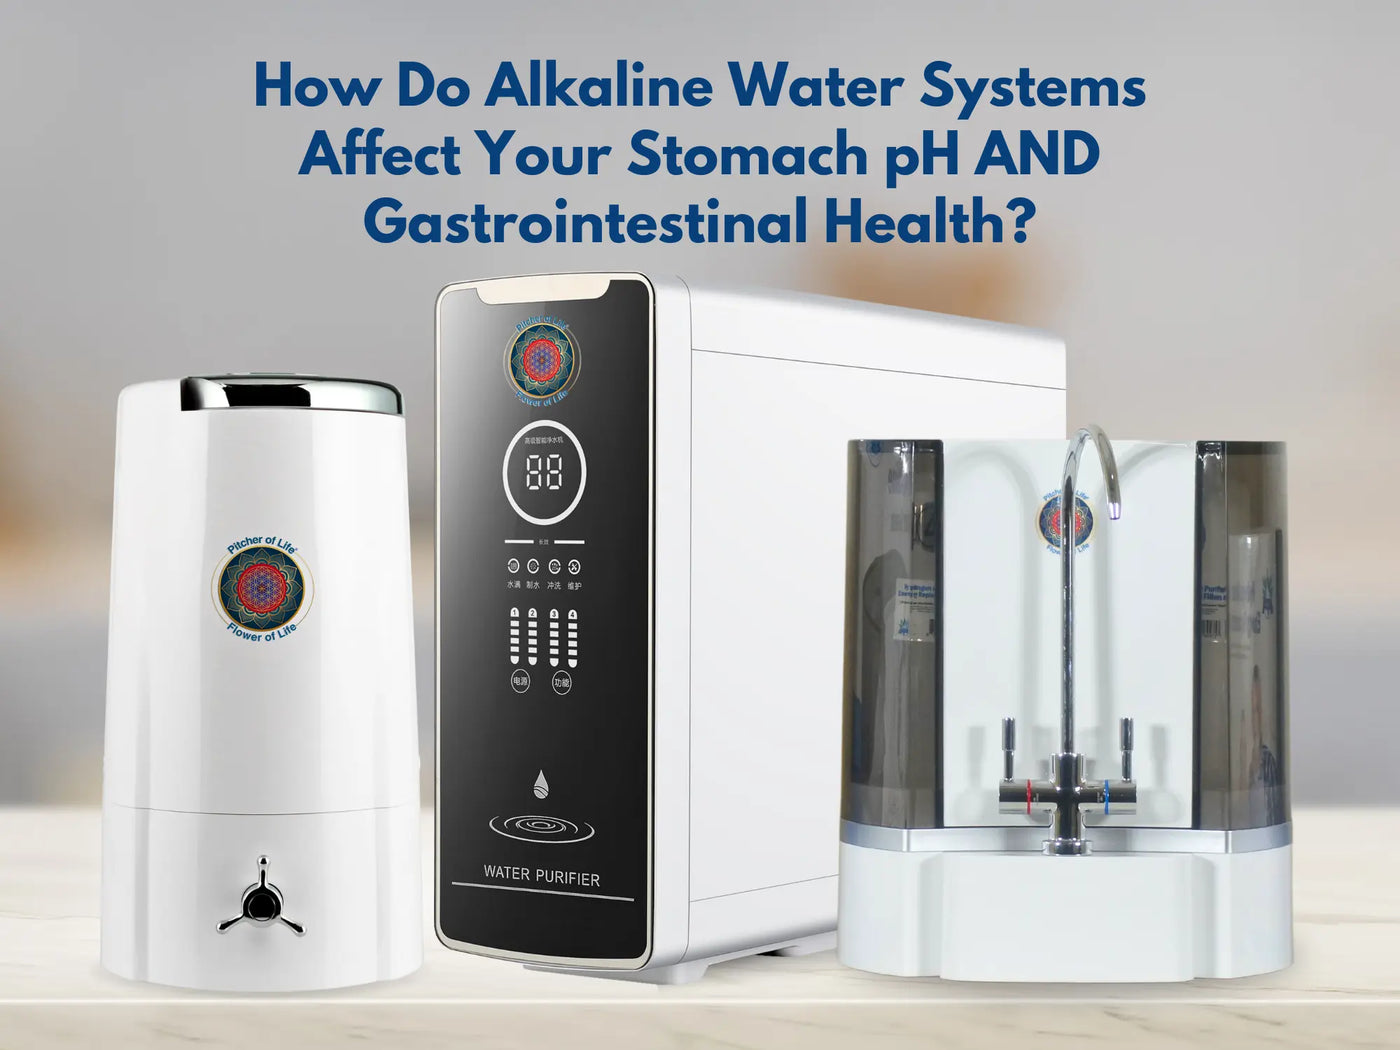 How Do Alkaline Water Systems Affect Your Stomach pH AND Gastrointestinal Health?